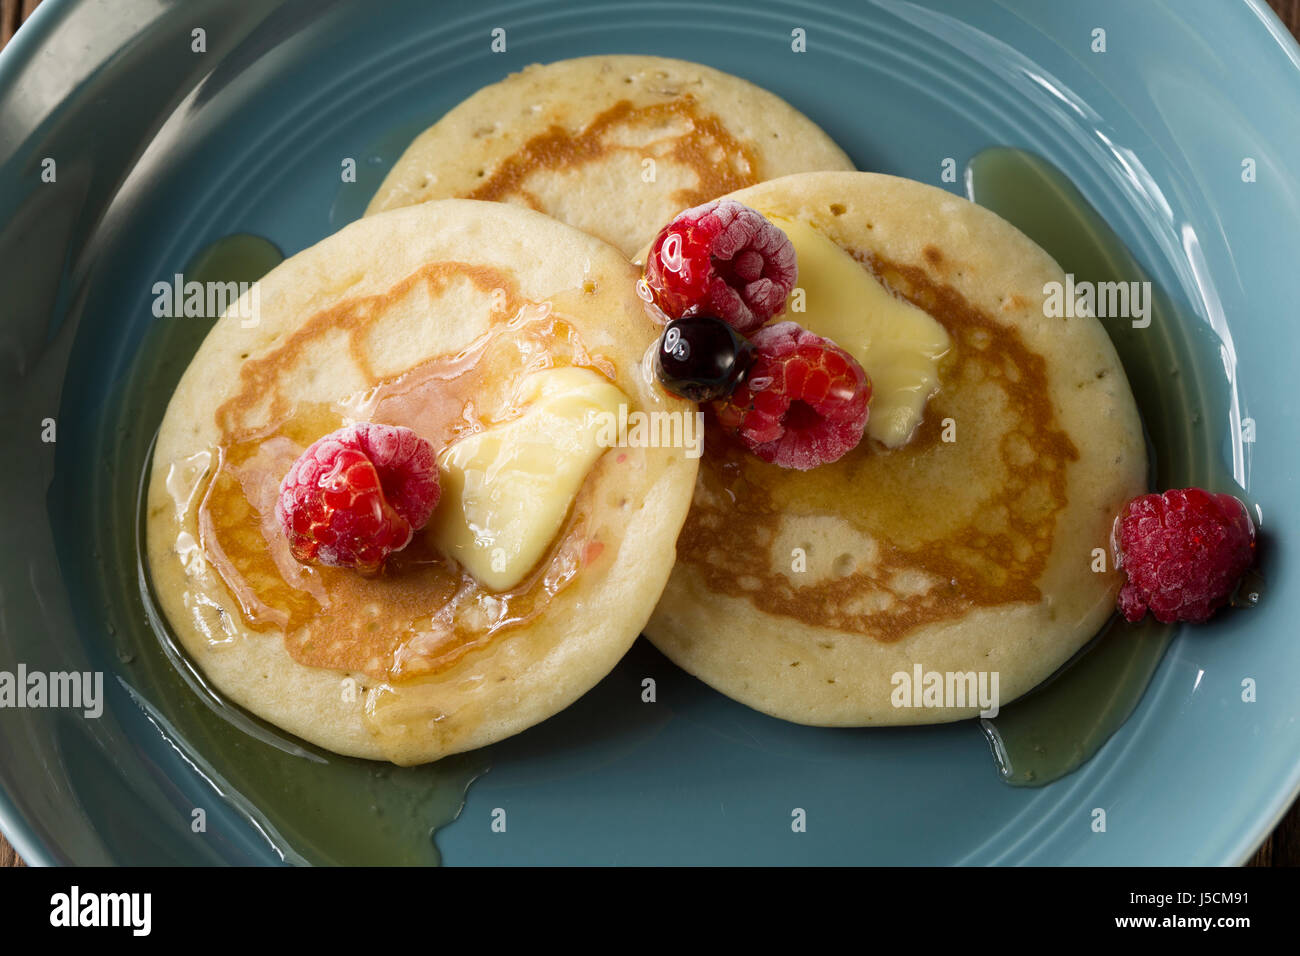 Three fresh pancakes, drizzled with syrup and Berries in a blue bowl, sitting on a rustic wooden table. Stock Photo